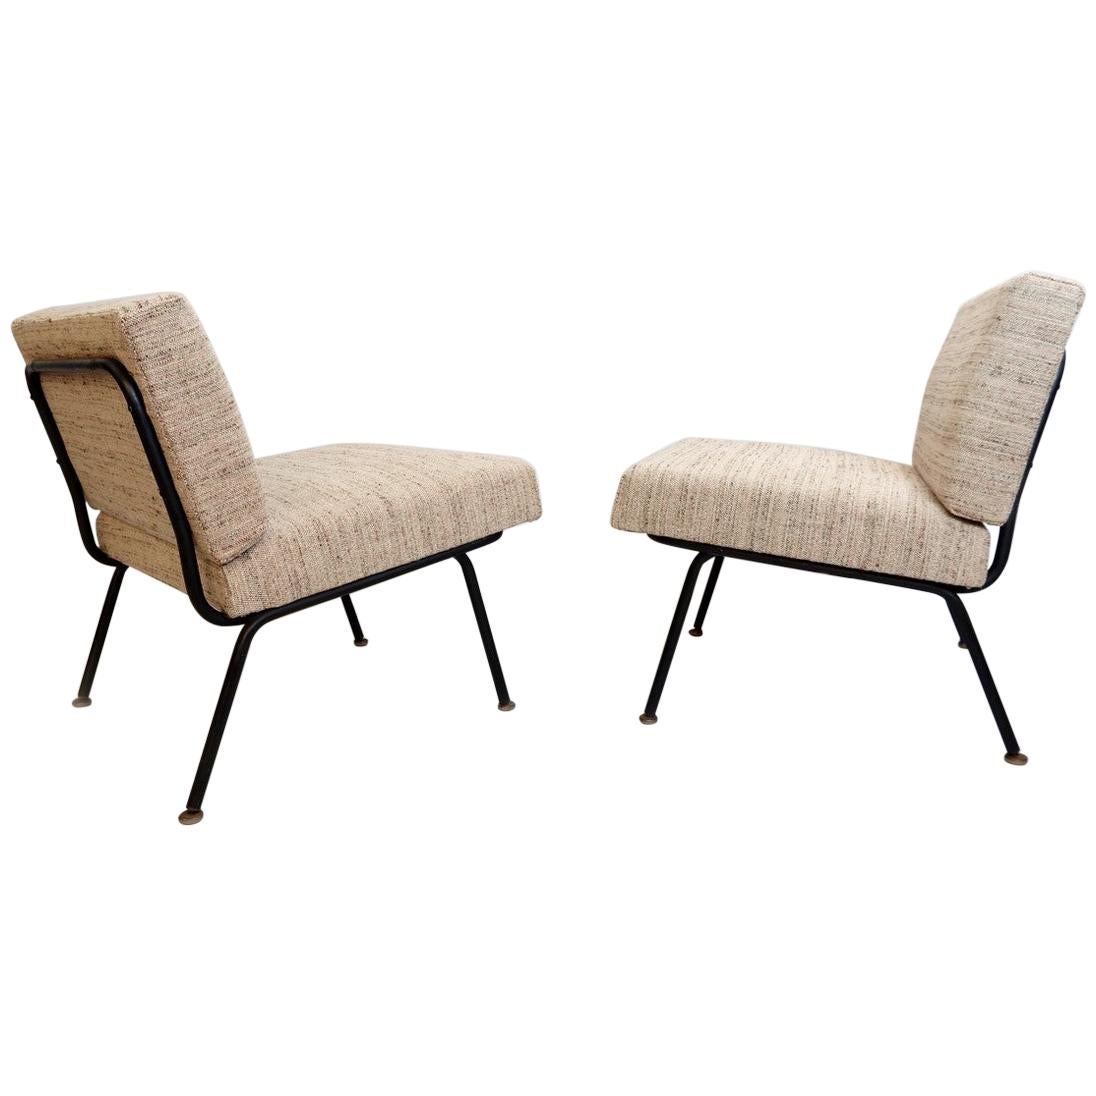 Pair of Italian Easy Chairs with a Black Tubular Steel Frame, New Upholstery